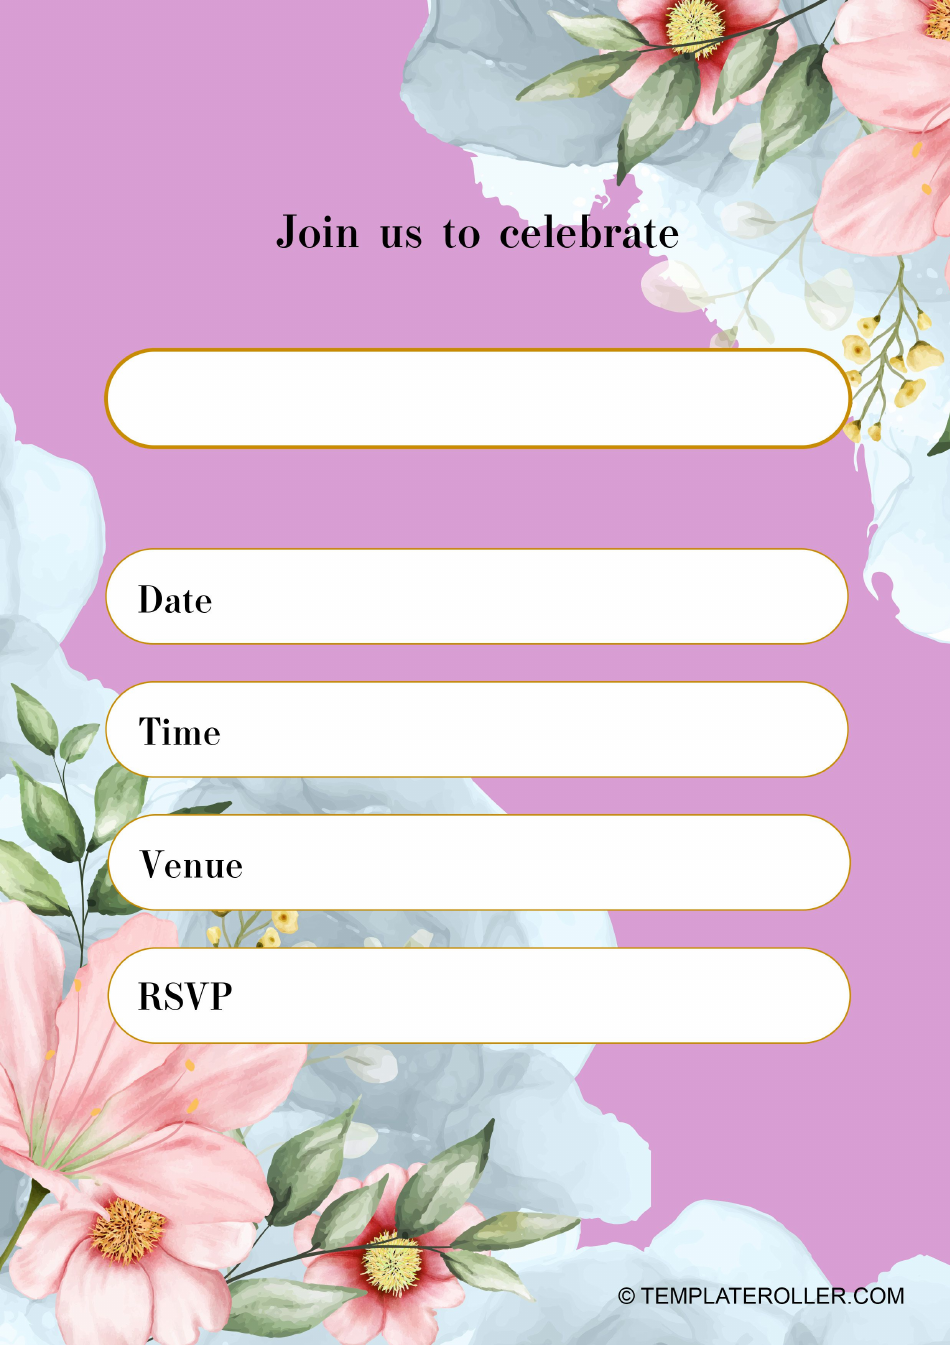 Event invitation template with a modern and elegant design in pink color.